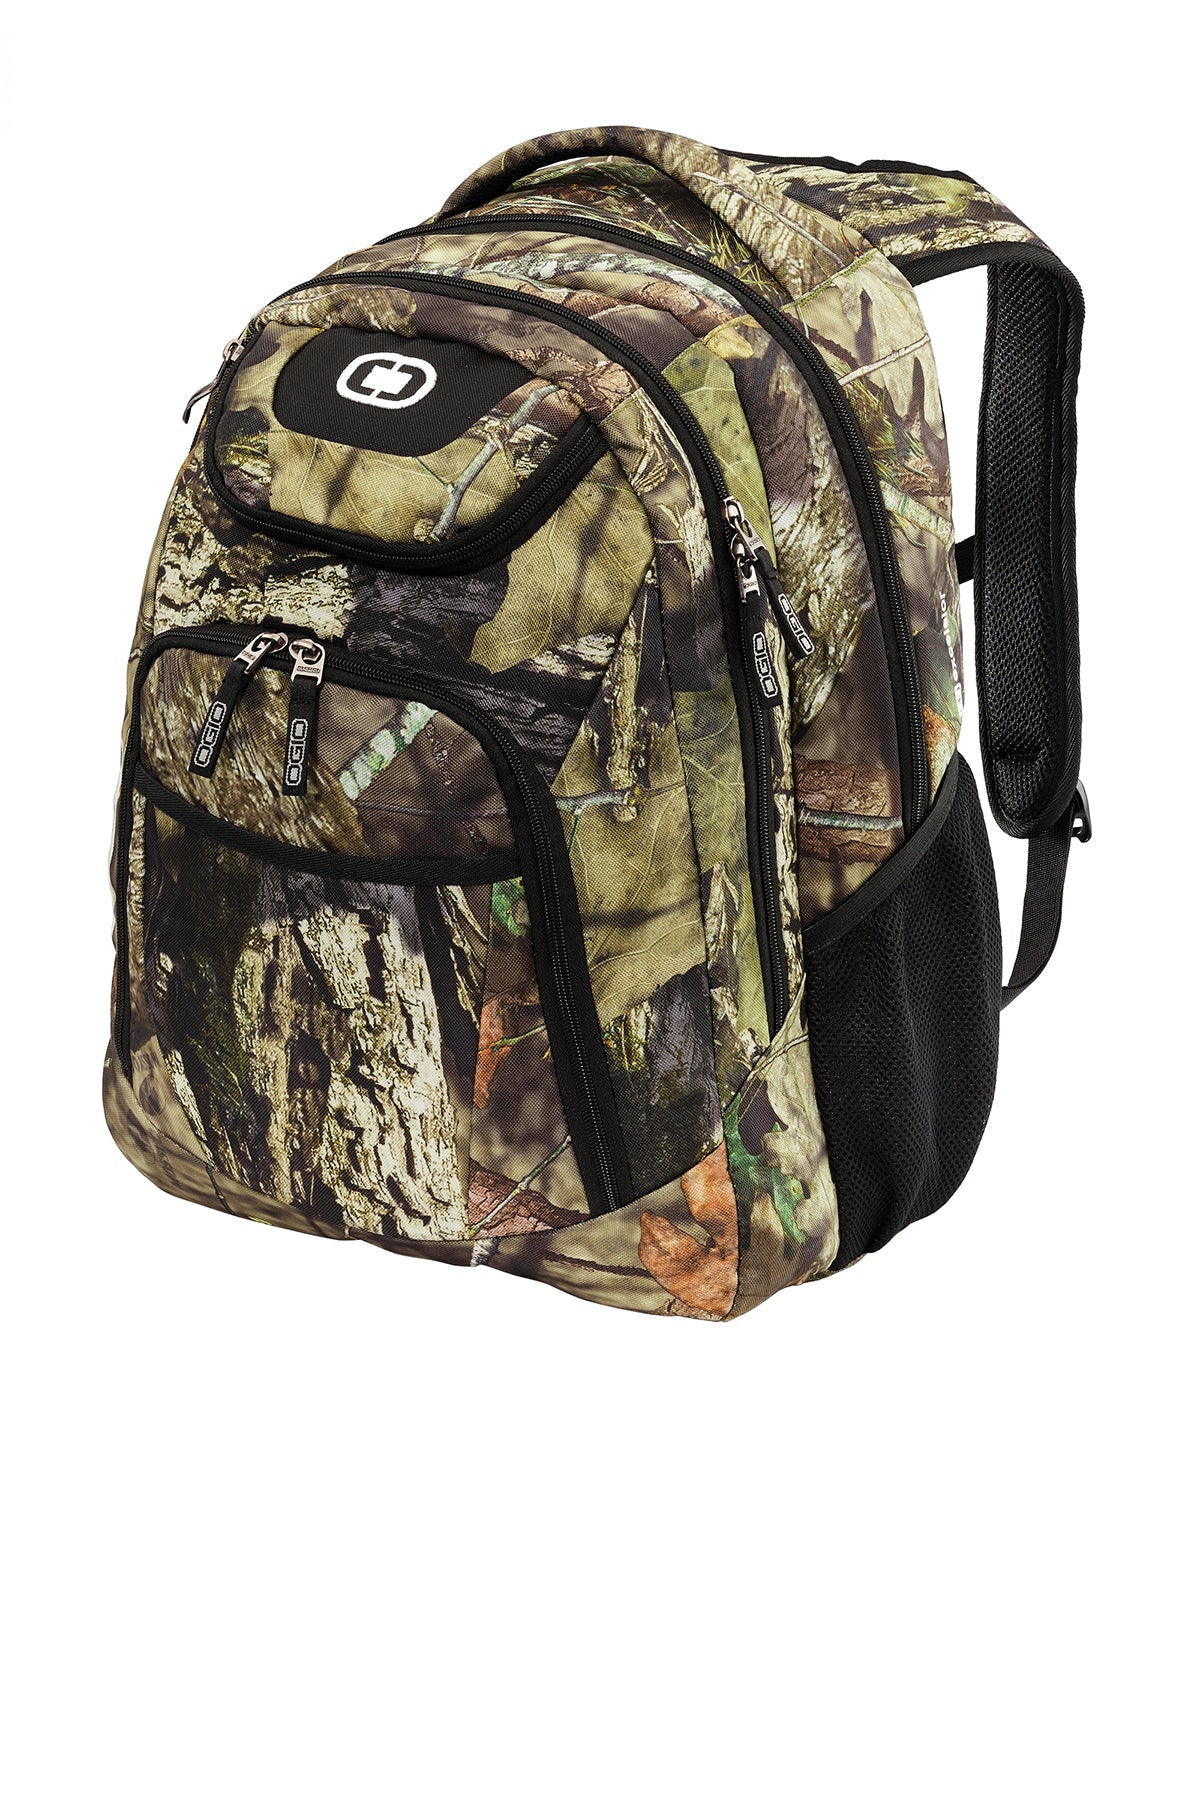 OGIO Camo Excelsior Customzied Backpacks, Mossy Oak Break-Up Country